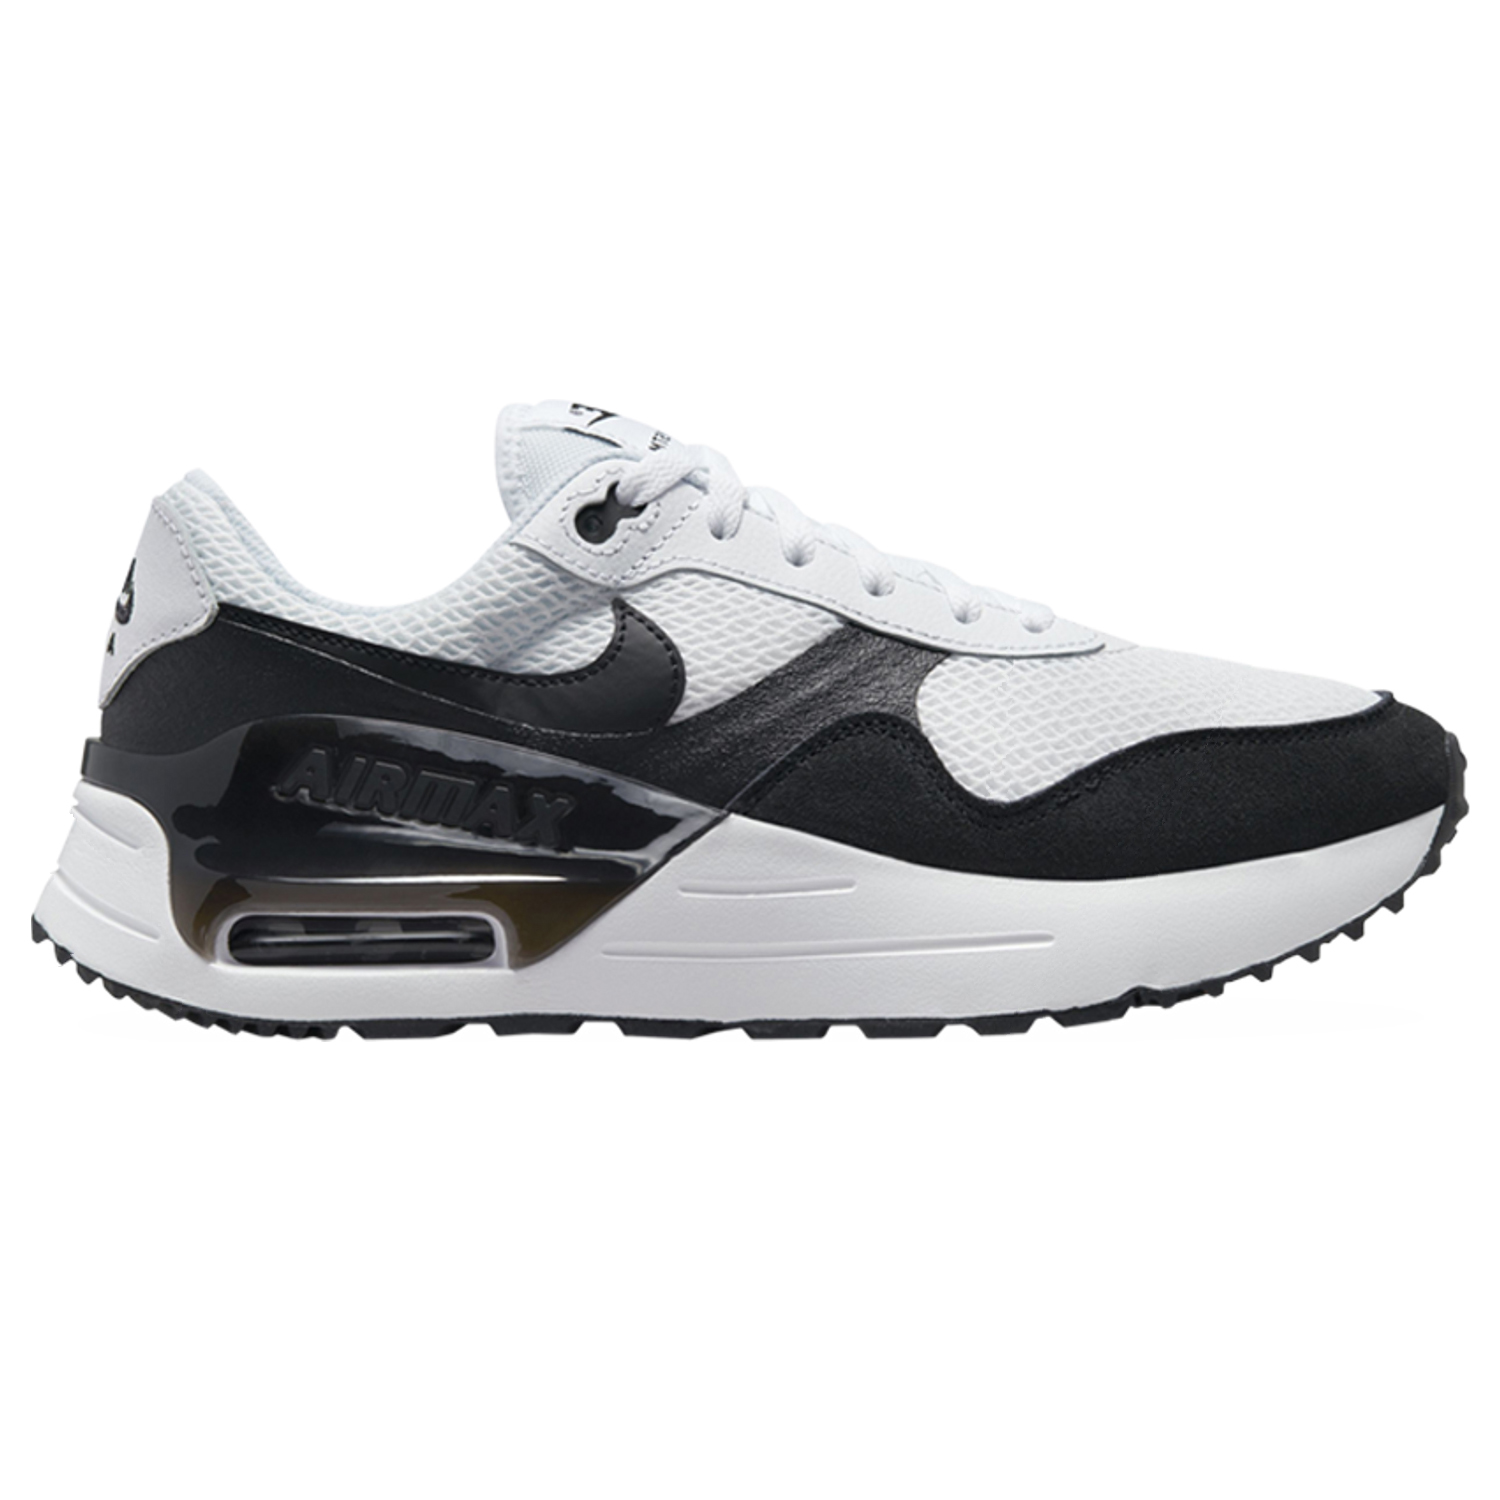 Кроссовки Nike Air Max SYSTM 'White Black', Белый кроссовки nike air max systm summit white dm9537 103 белый